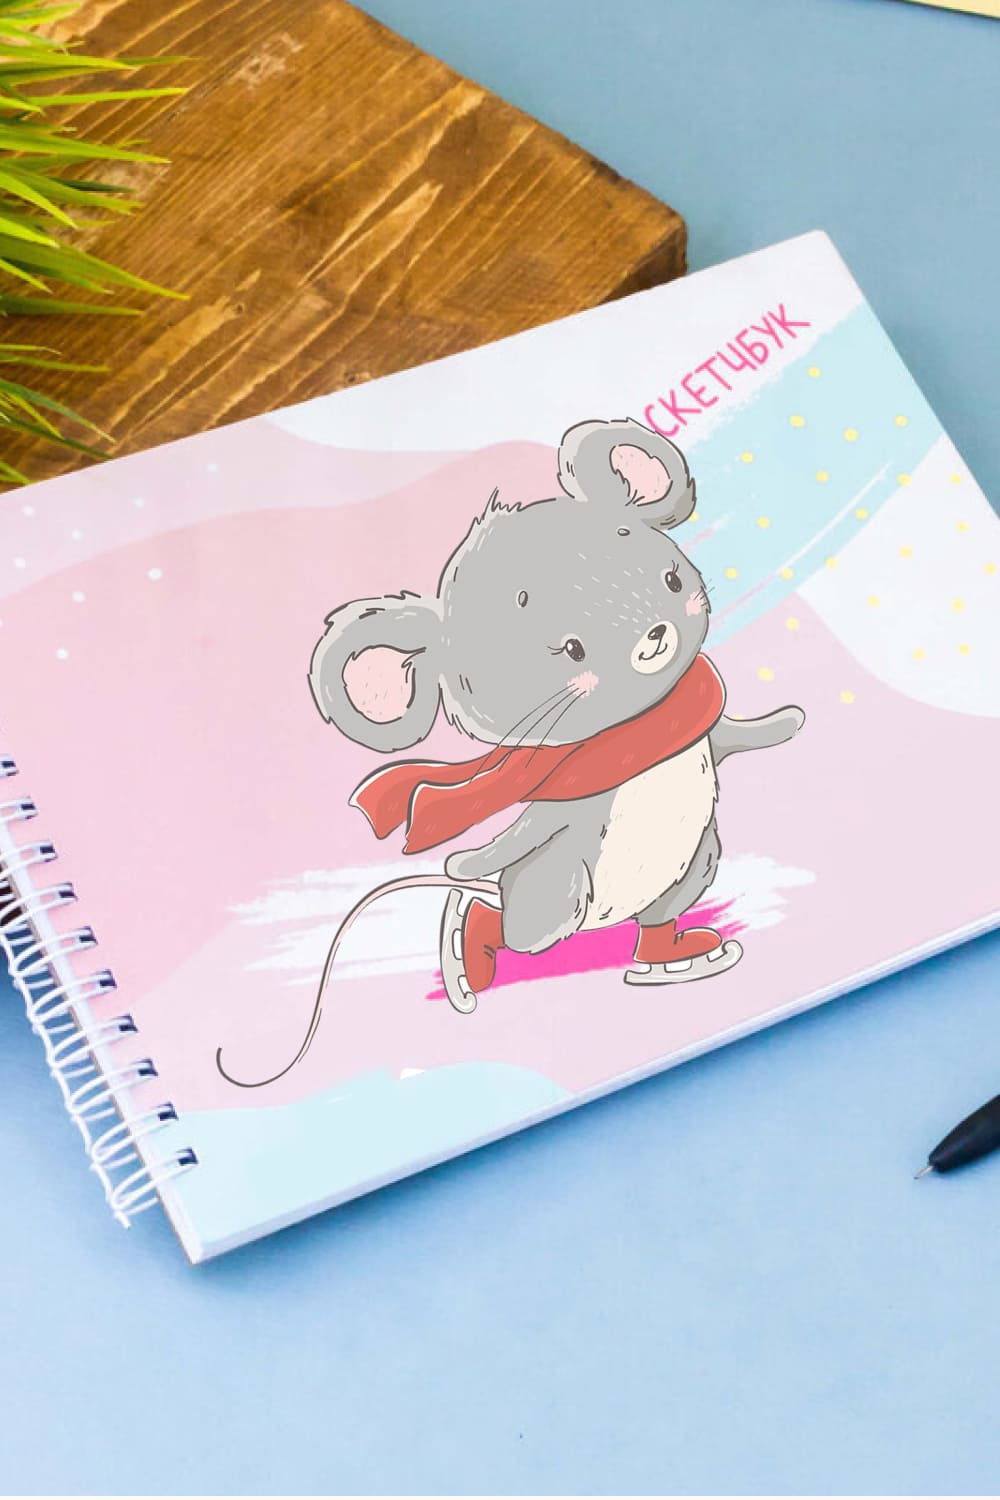 Cute illustrations will look great on your creative notes.